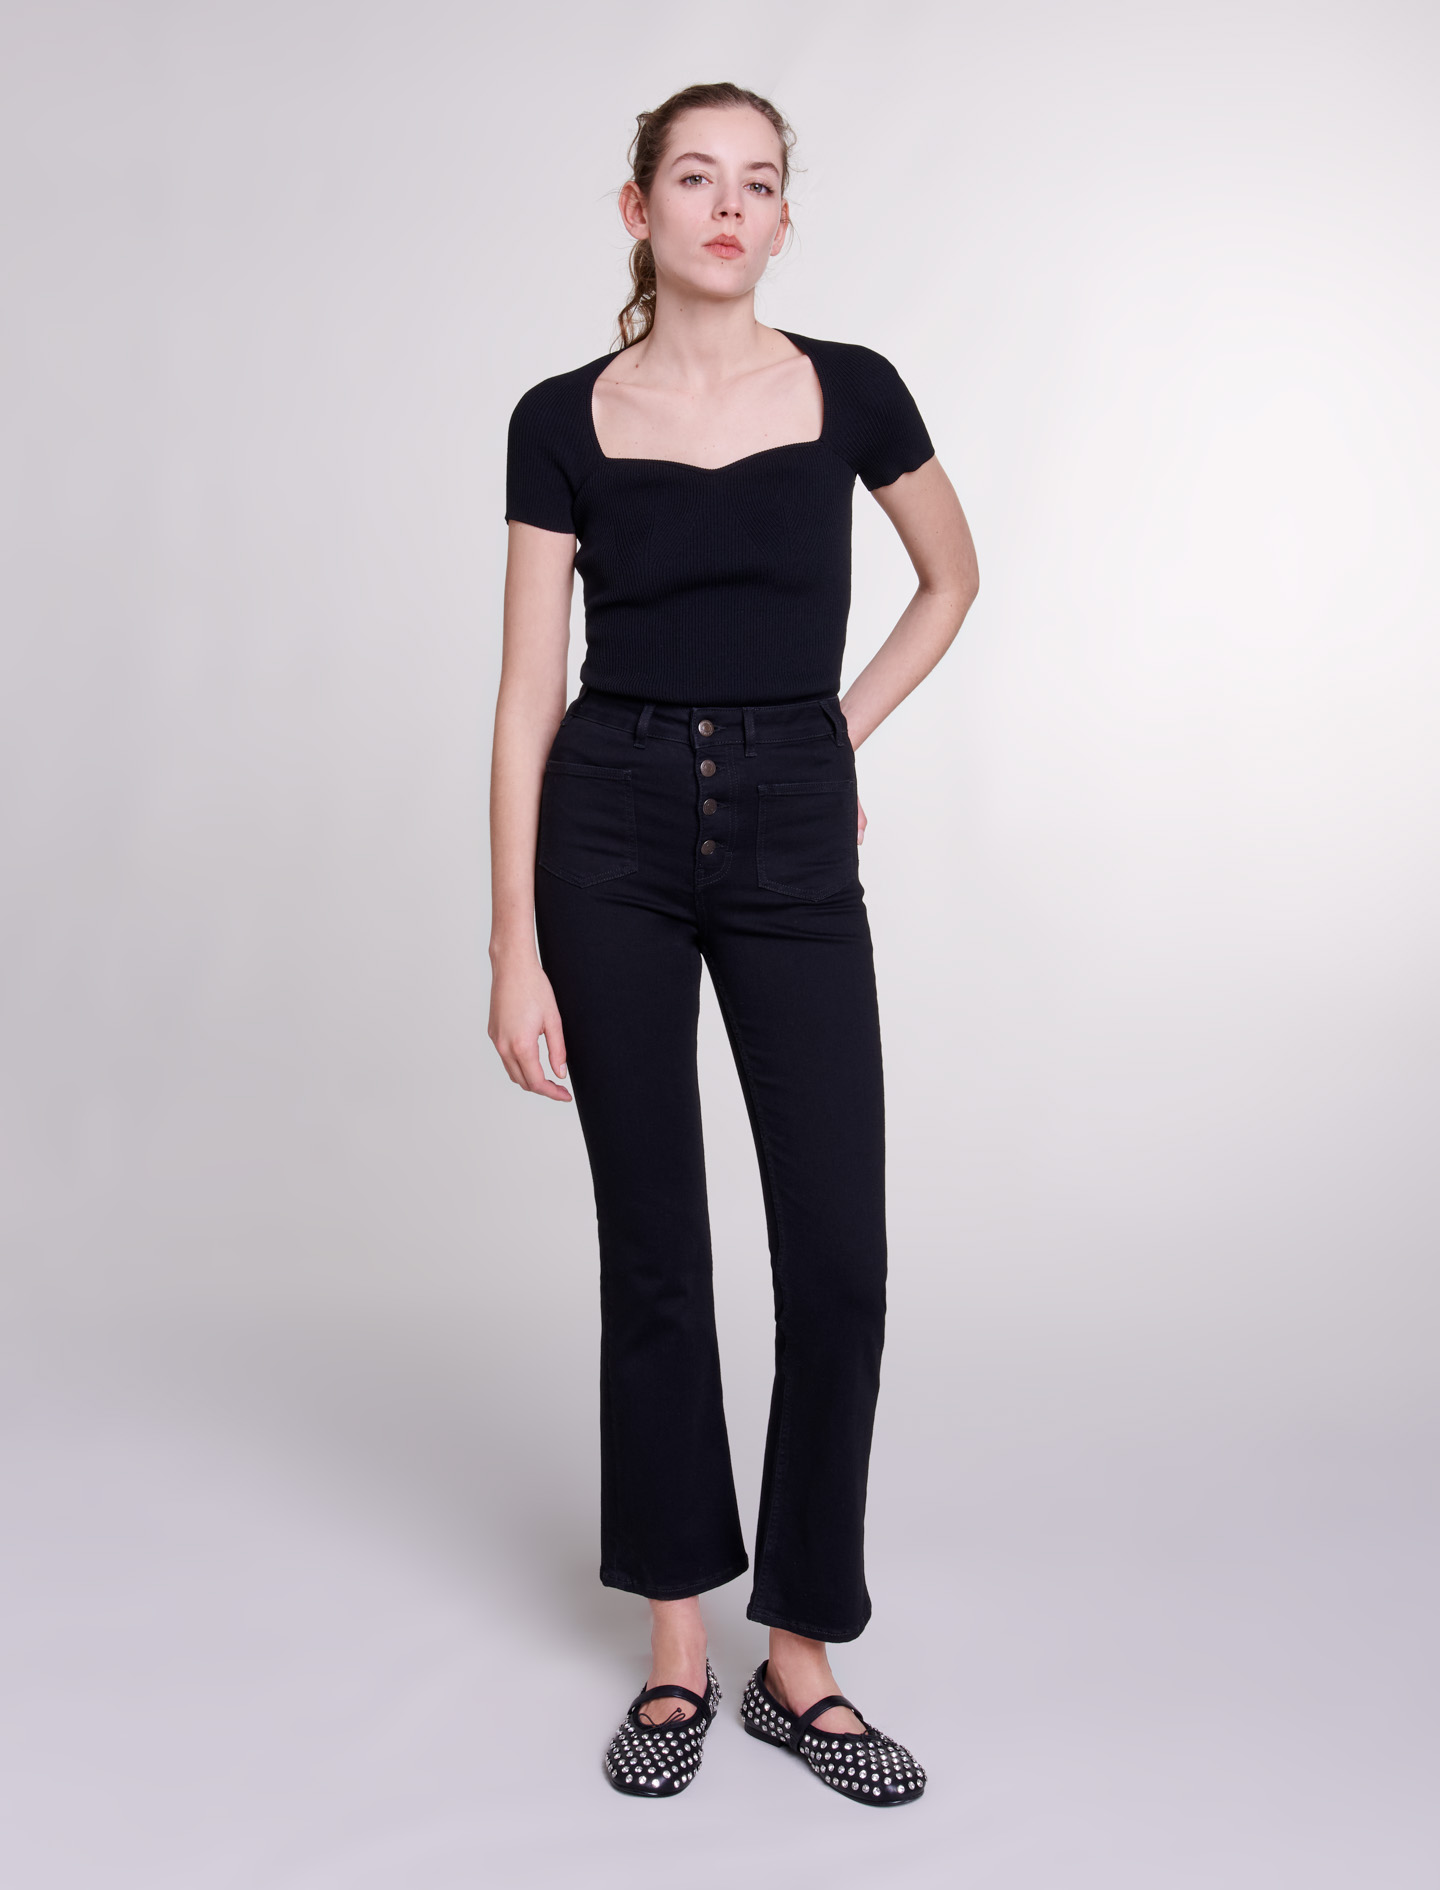 Maje Woman's cotton, Jeans with pockets, flared at the bottom for Fall/Winter, in color Black / Black